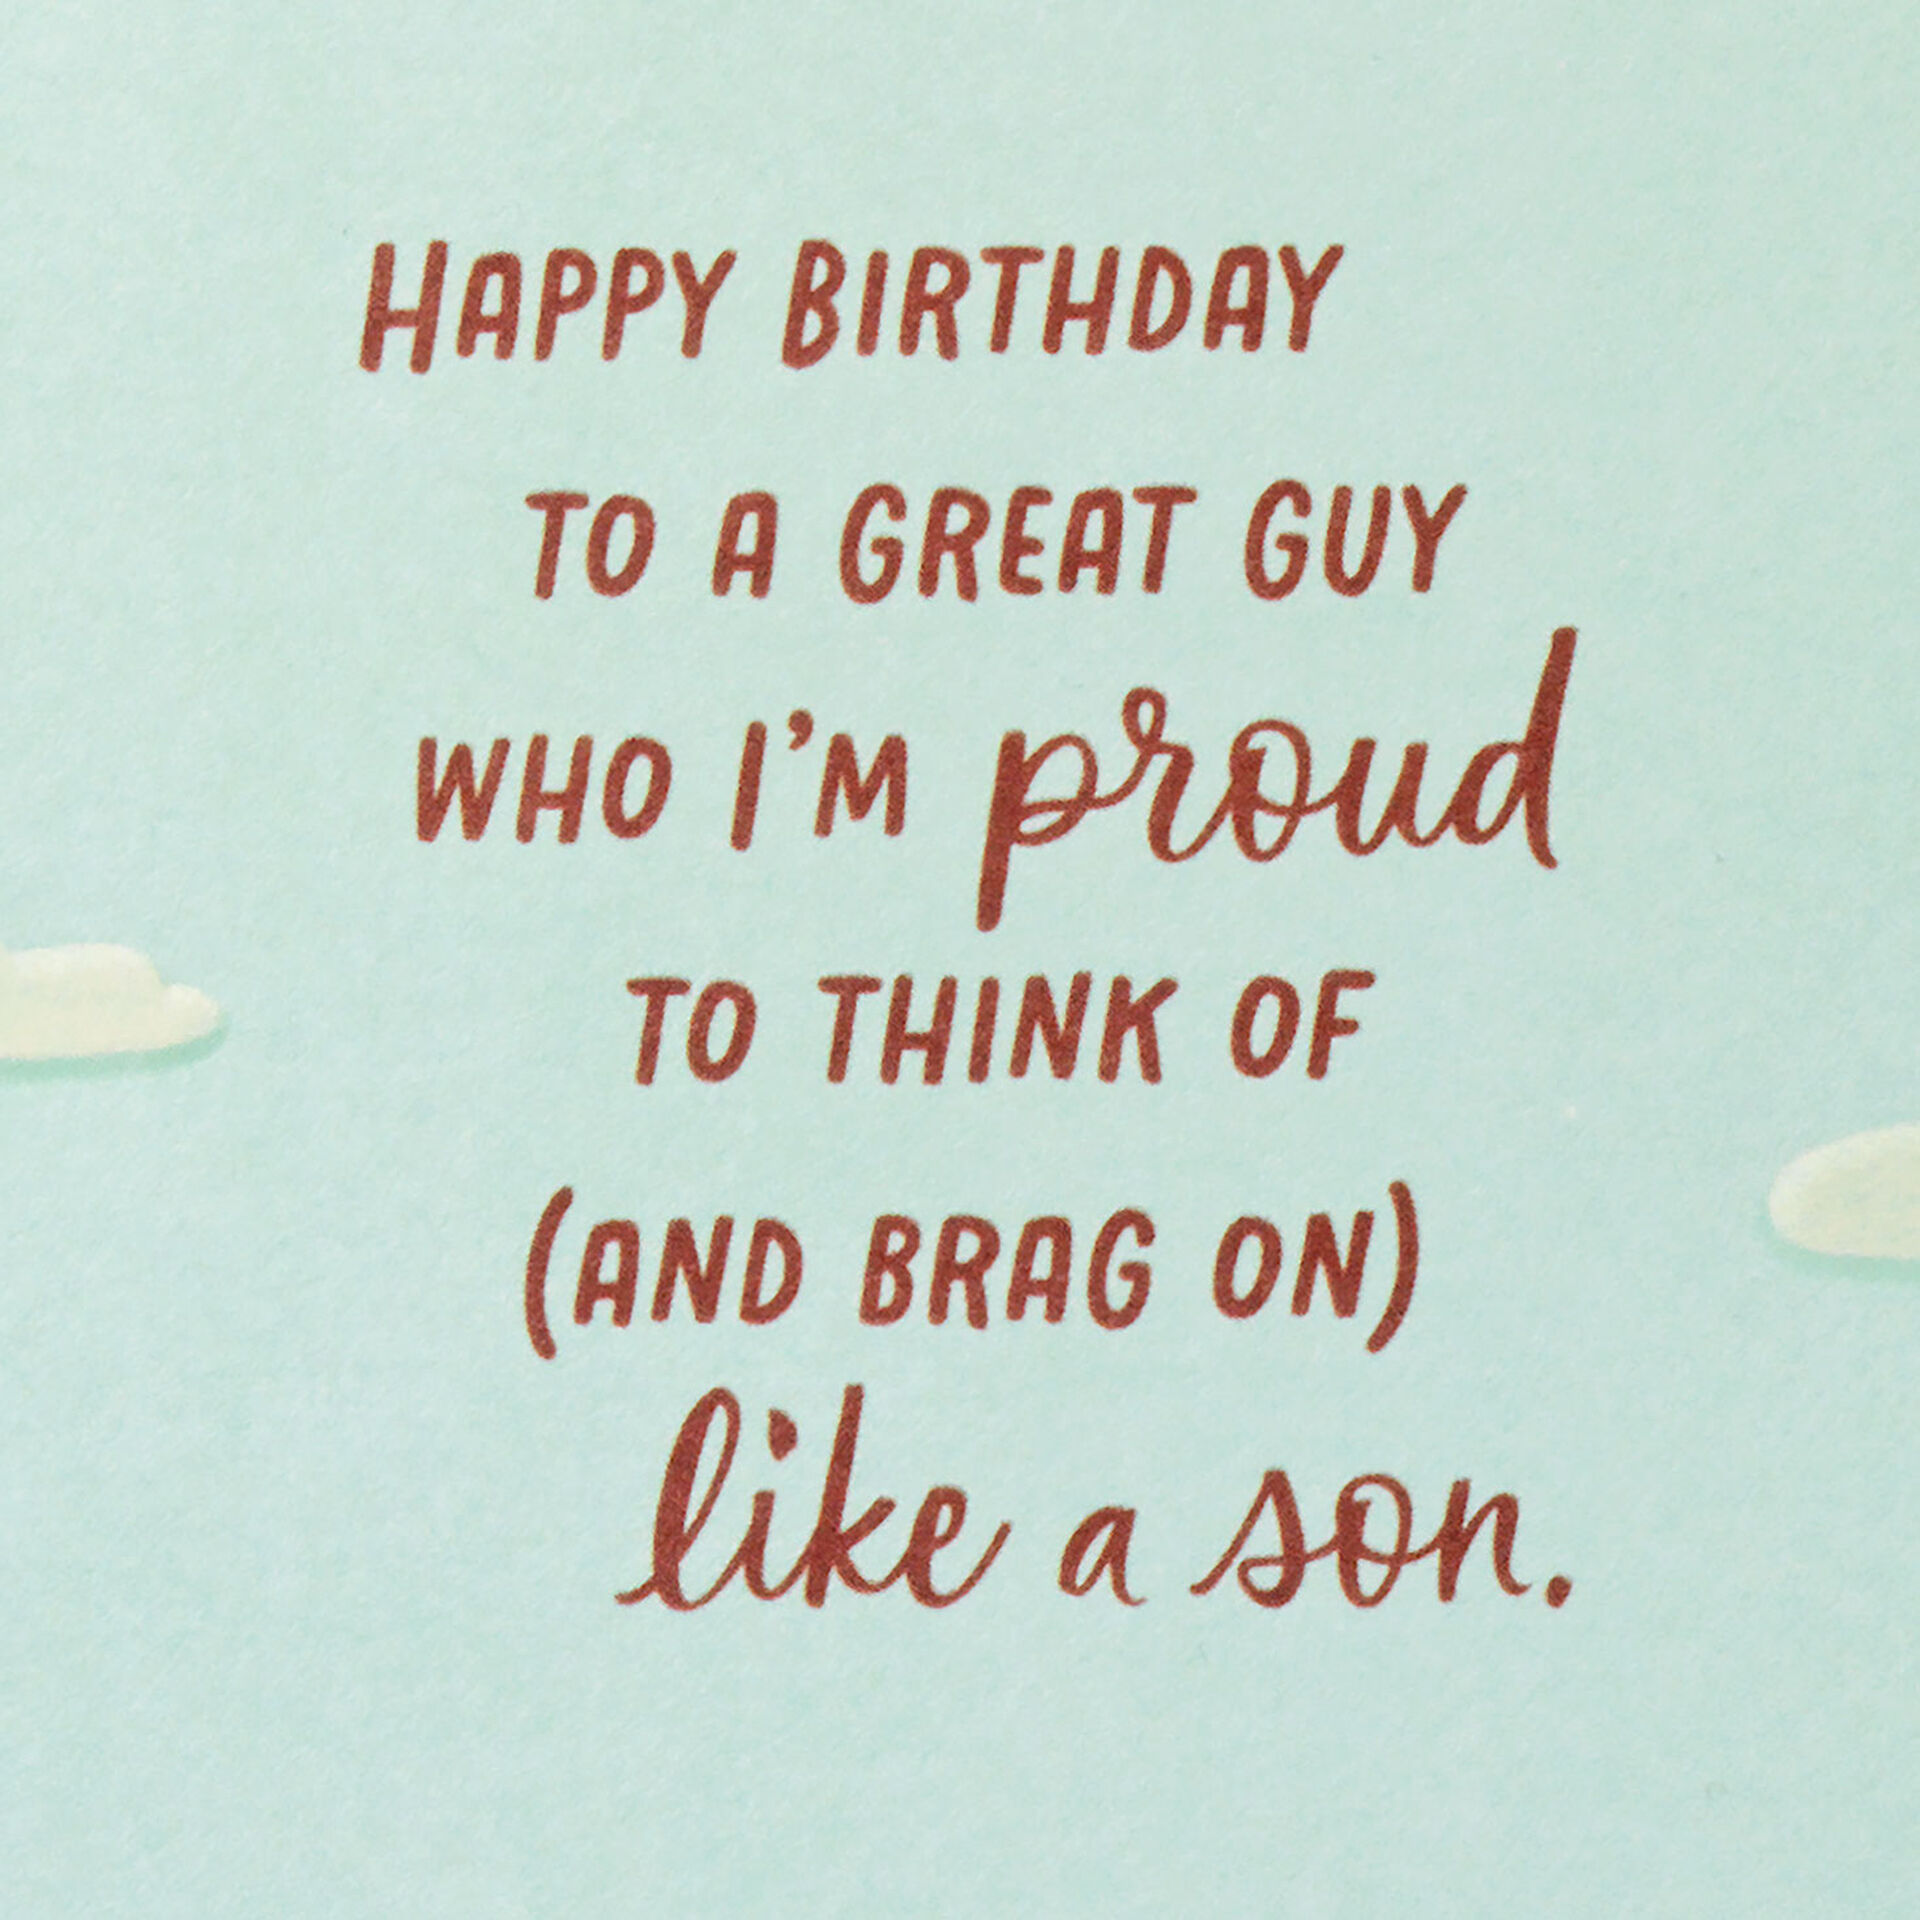 Sunset-Landscape-Like-a-Son-Birthday-Card-for-Him_299MAN3916_02